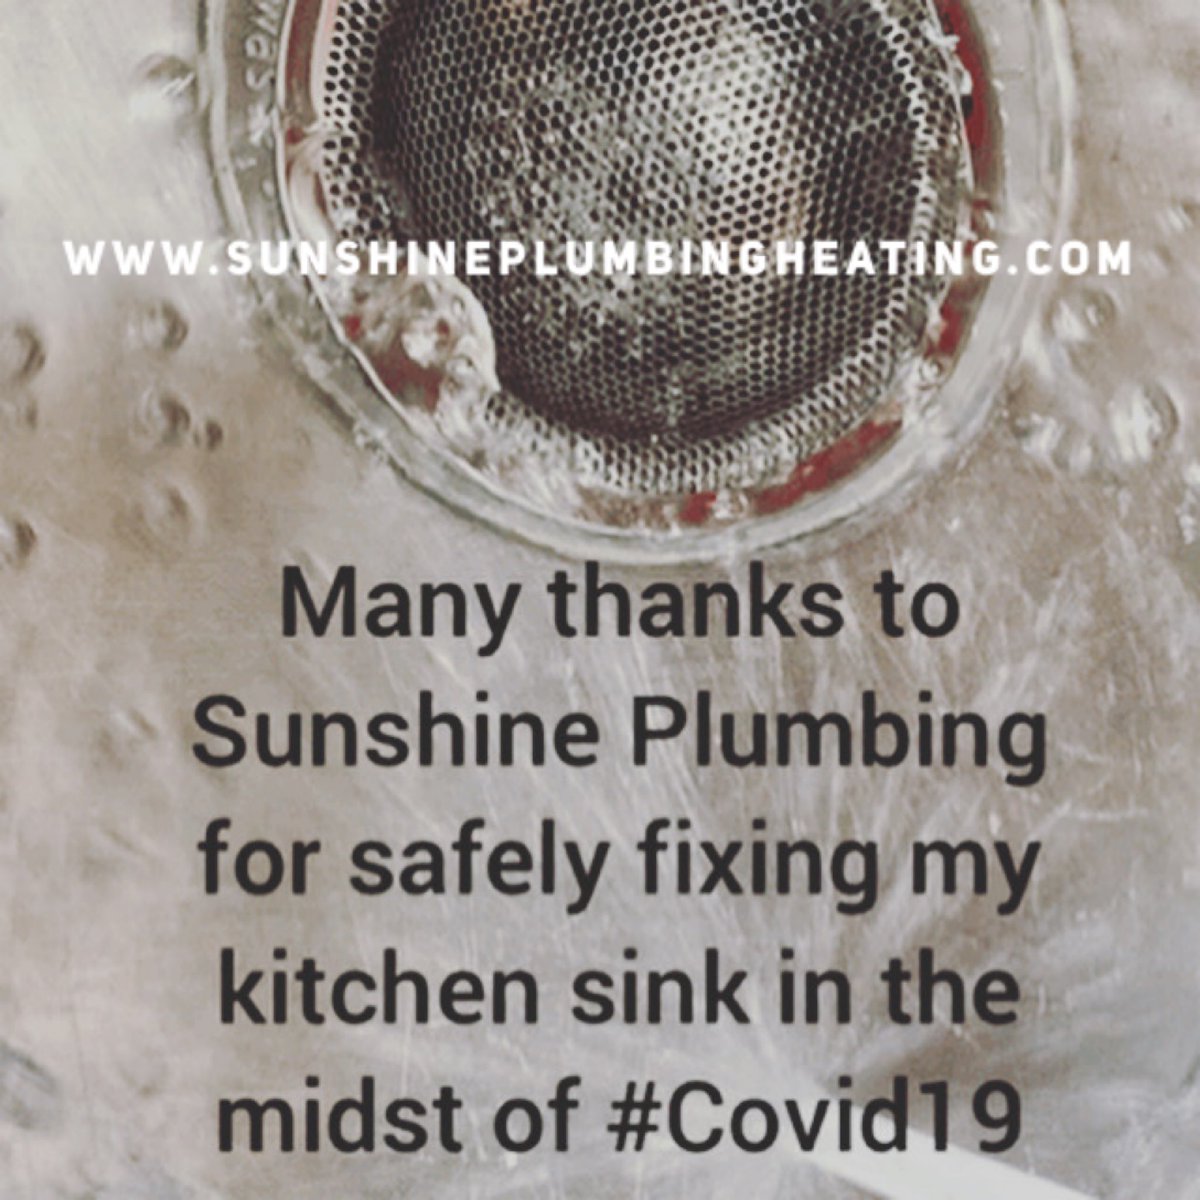 Easy referral for those in the Greater Denver Area in need of plumbing, heating, air services! Check out SunshinePlumbingHeating.com. ❤️ the extra precautions they took to keep everyone safe!